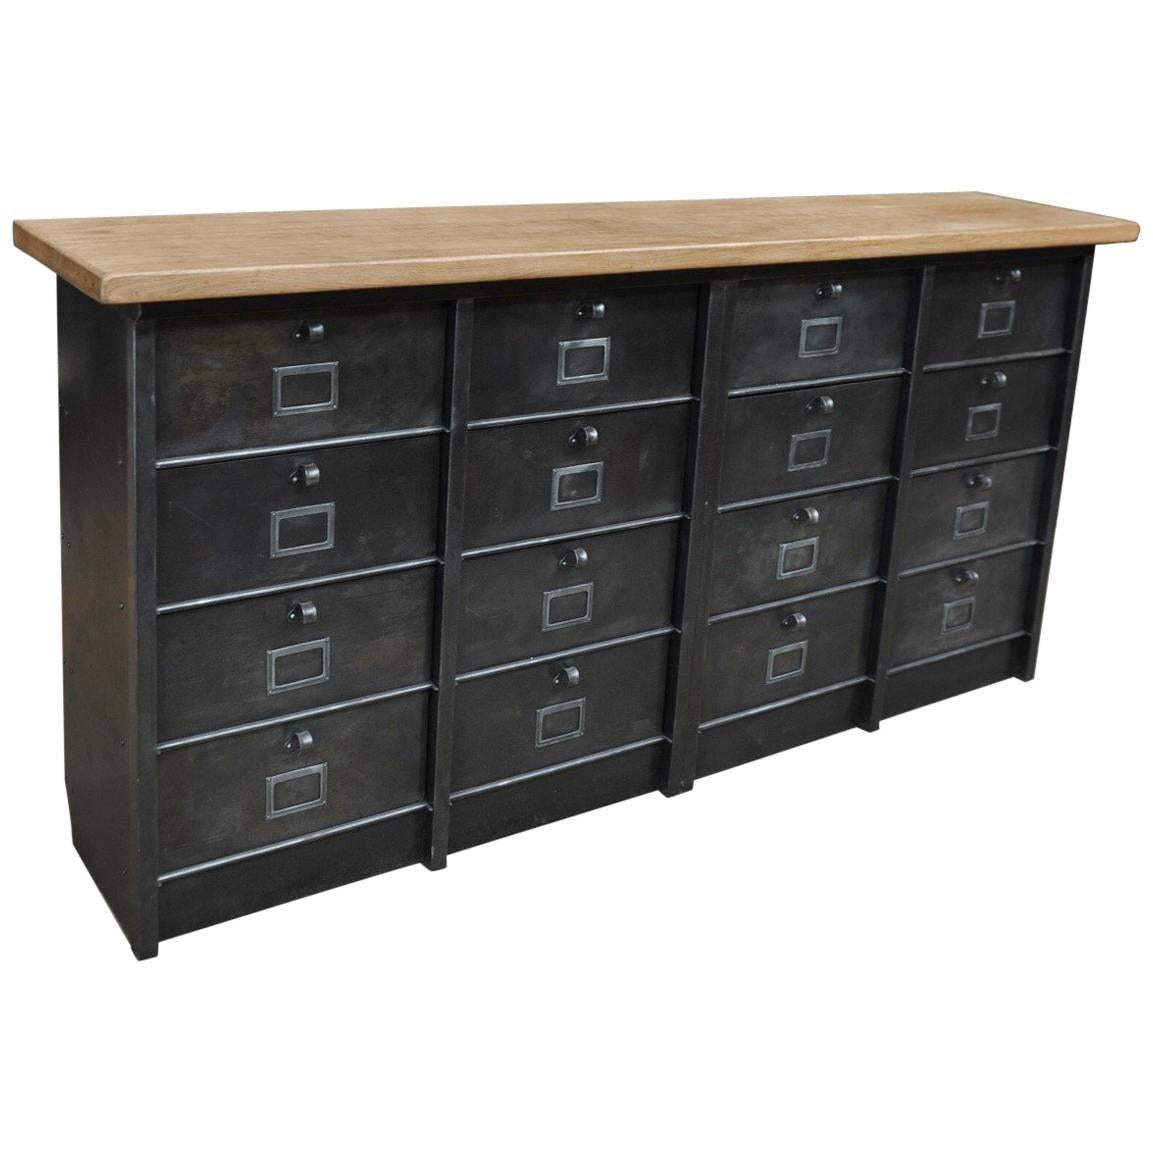 Roneo Iron Clapet Cabinet with Solid Oak Top